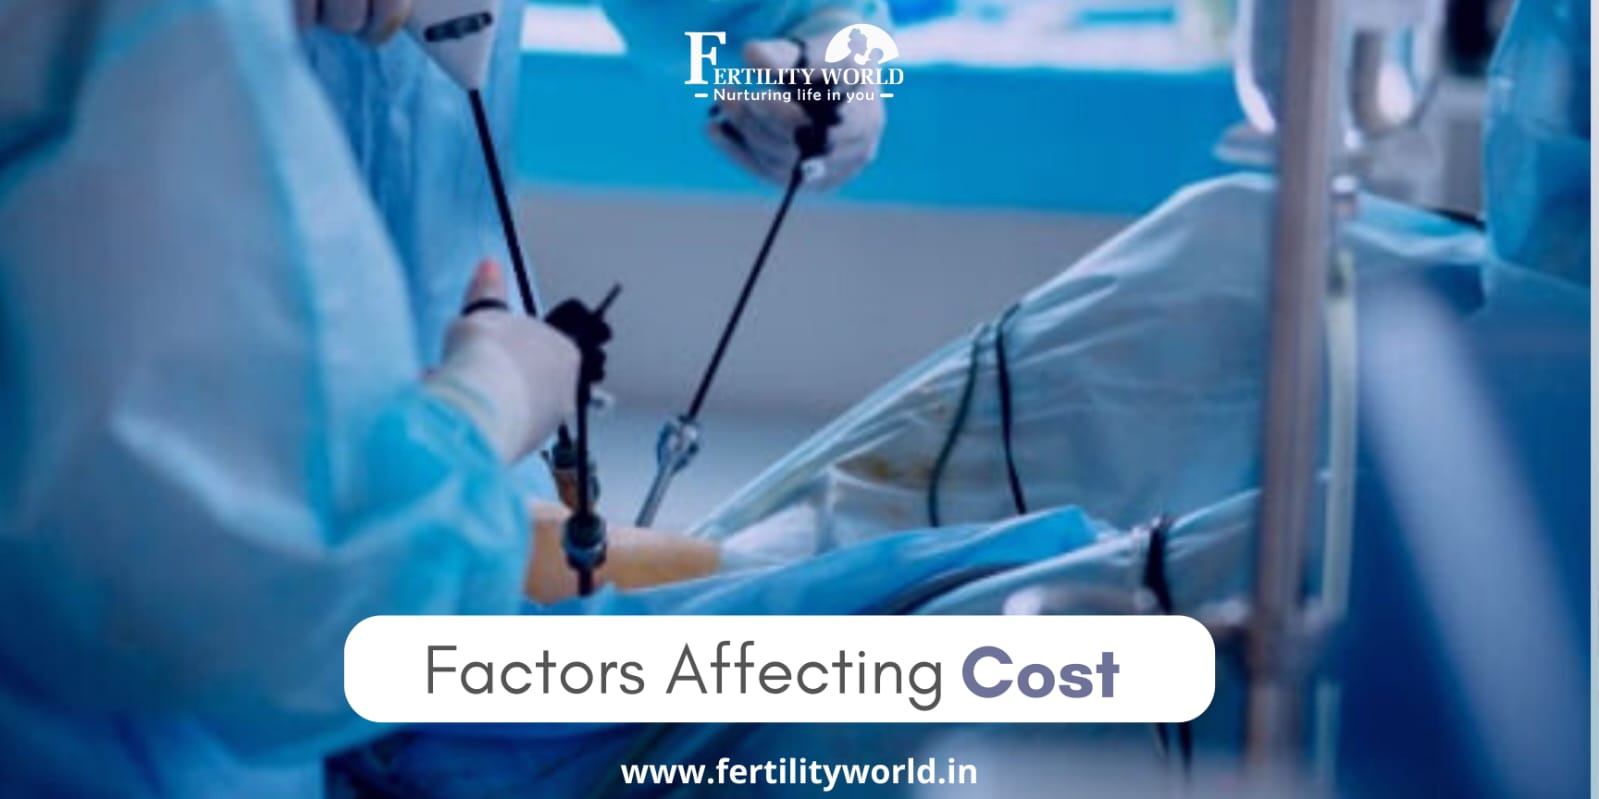 What factors affect the laparoscopic surgery cost?